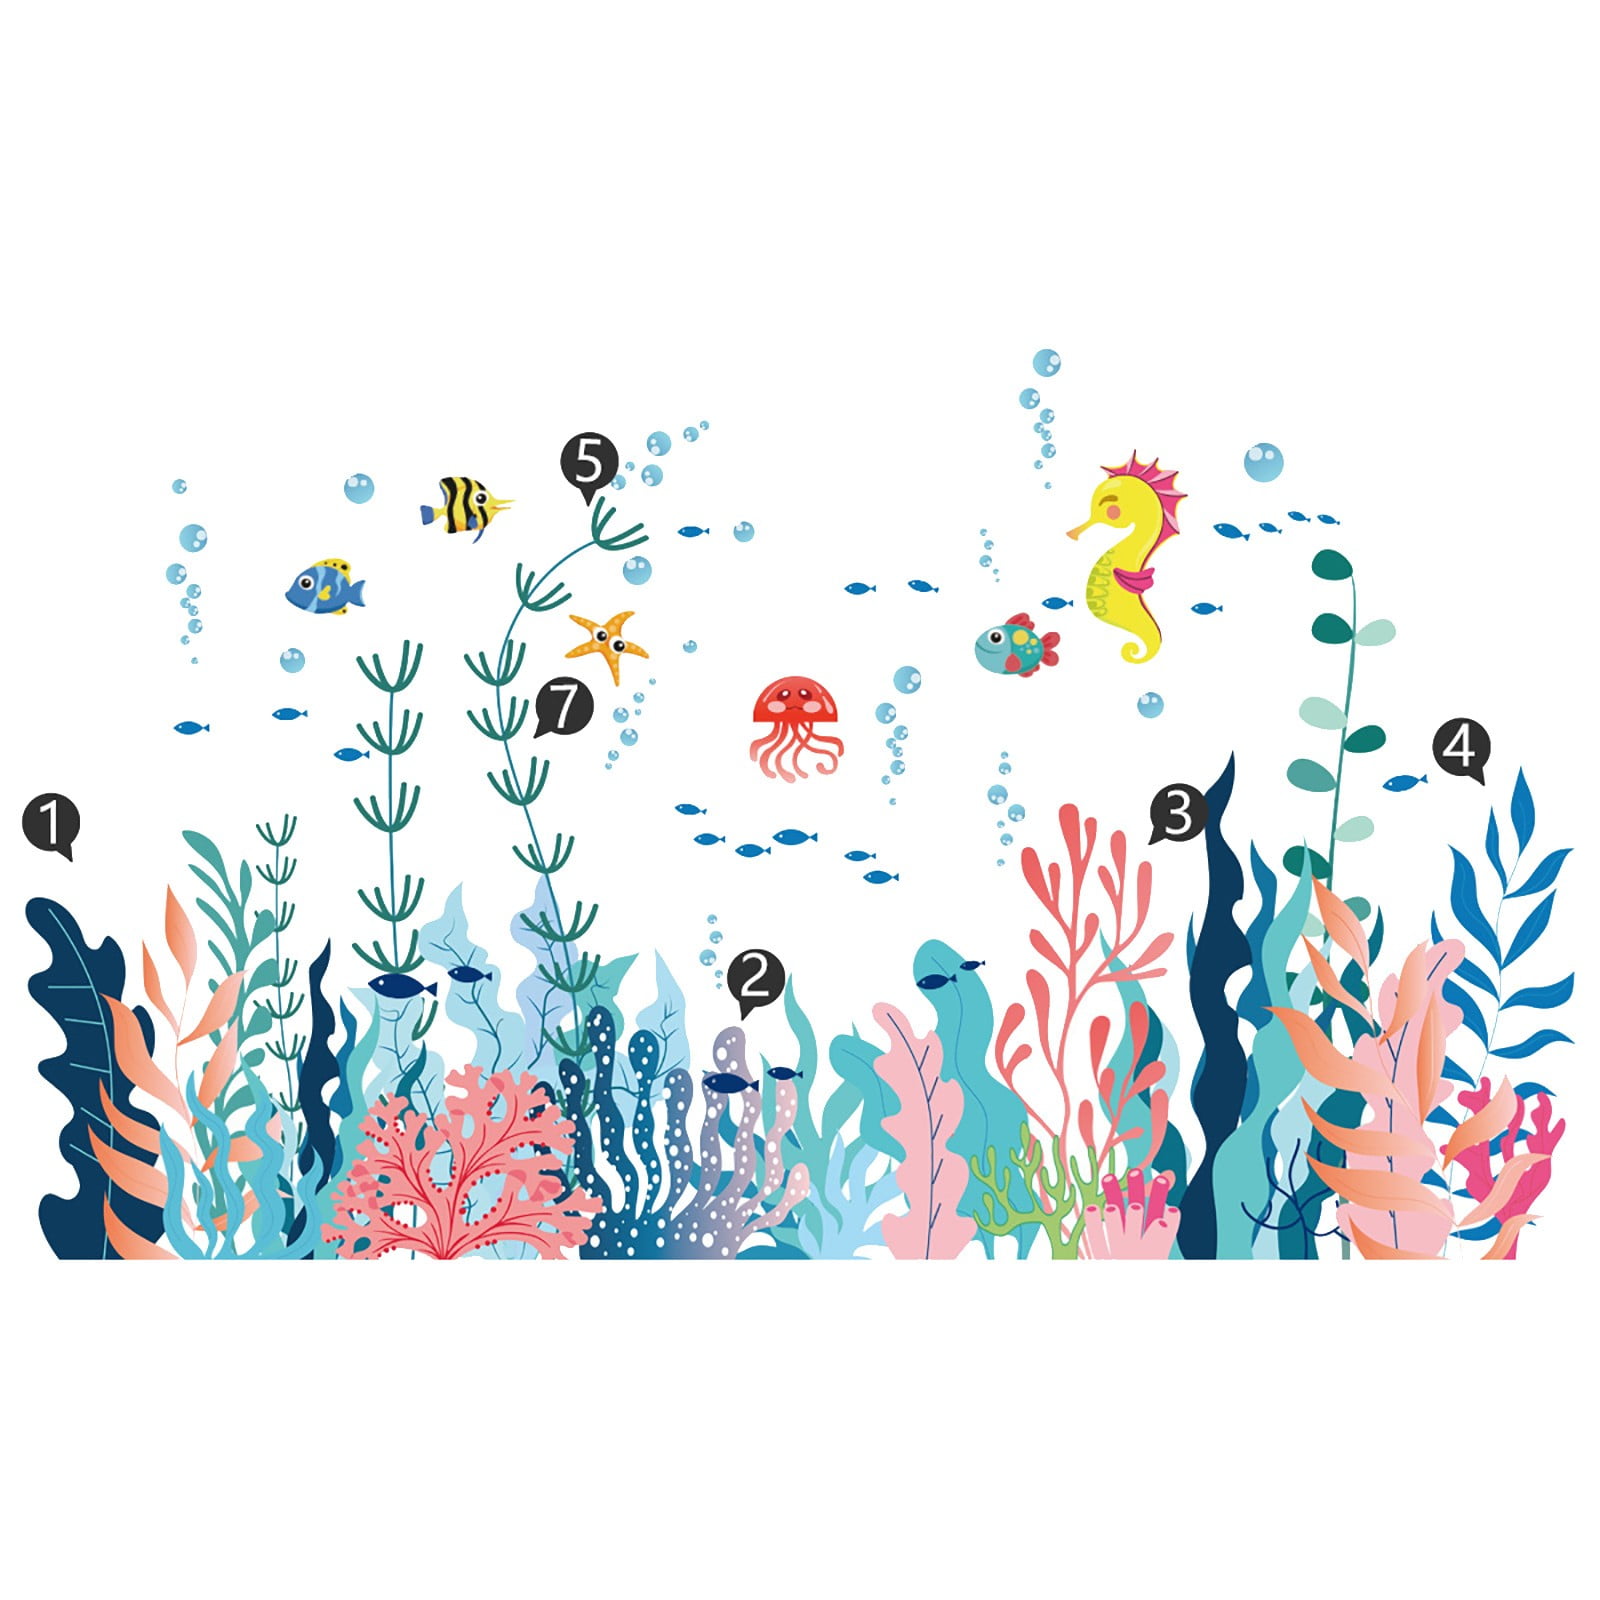 Moocorvic Ocean Stickers Ocean Room Decor Clearance, Under the Sea  Decorations Removable Peel and Stick Art for Kids Bedroom Living Room  Bathroom 